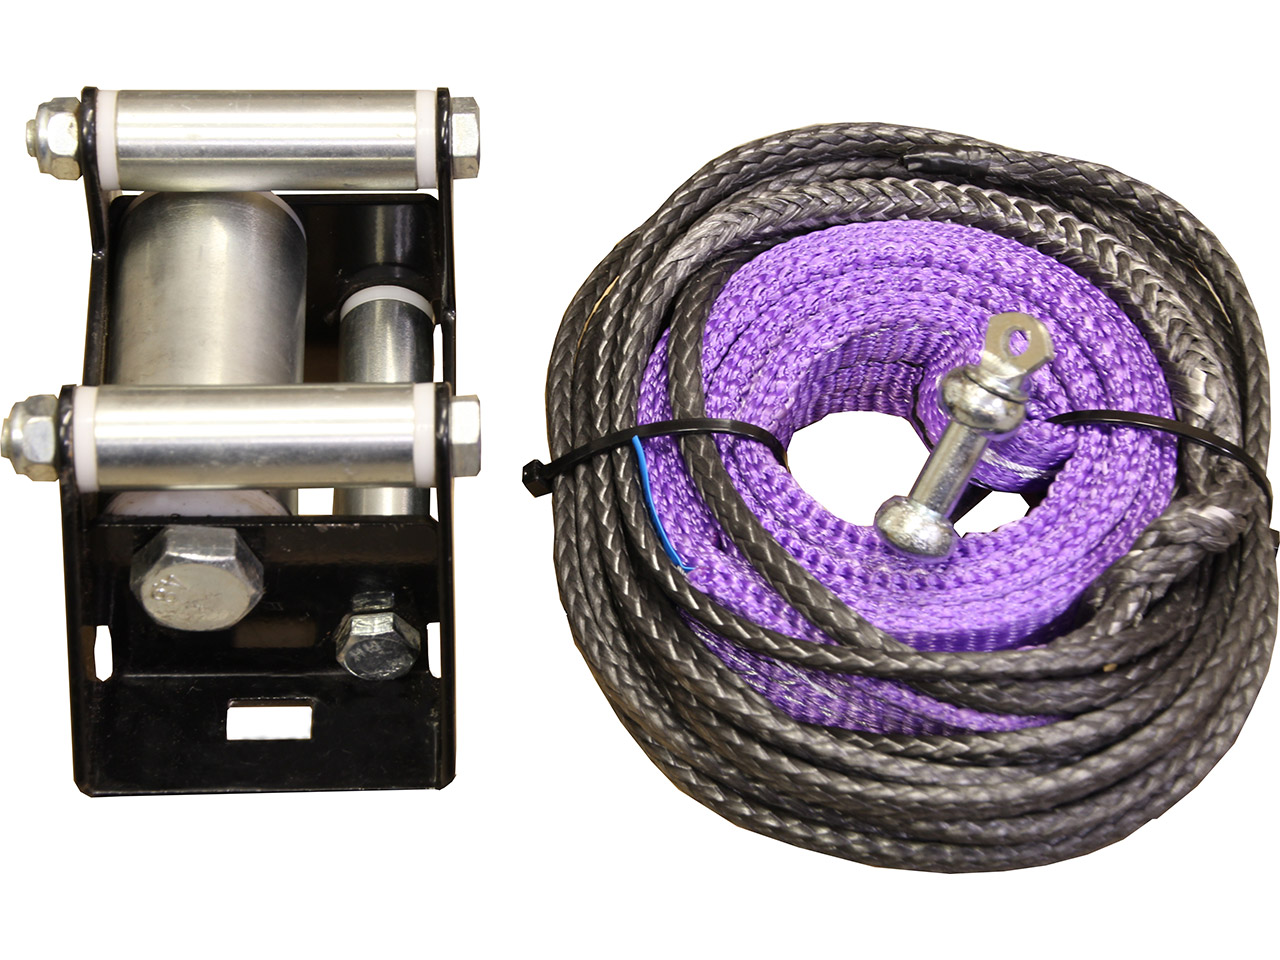 https://ironbaltic.com/sites/default/files/active_product_images/14.11300_01_plow-lift-strap-kit-for-a-winch-ironbaltic_1.jpg